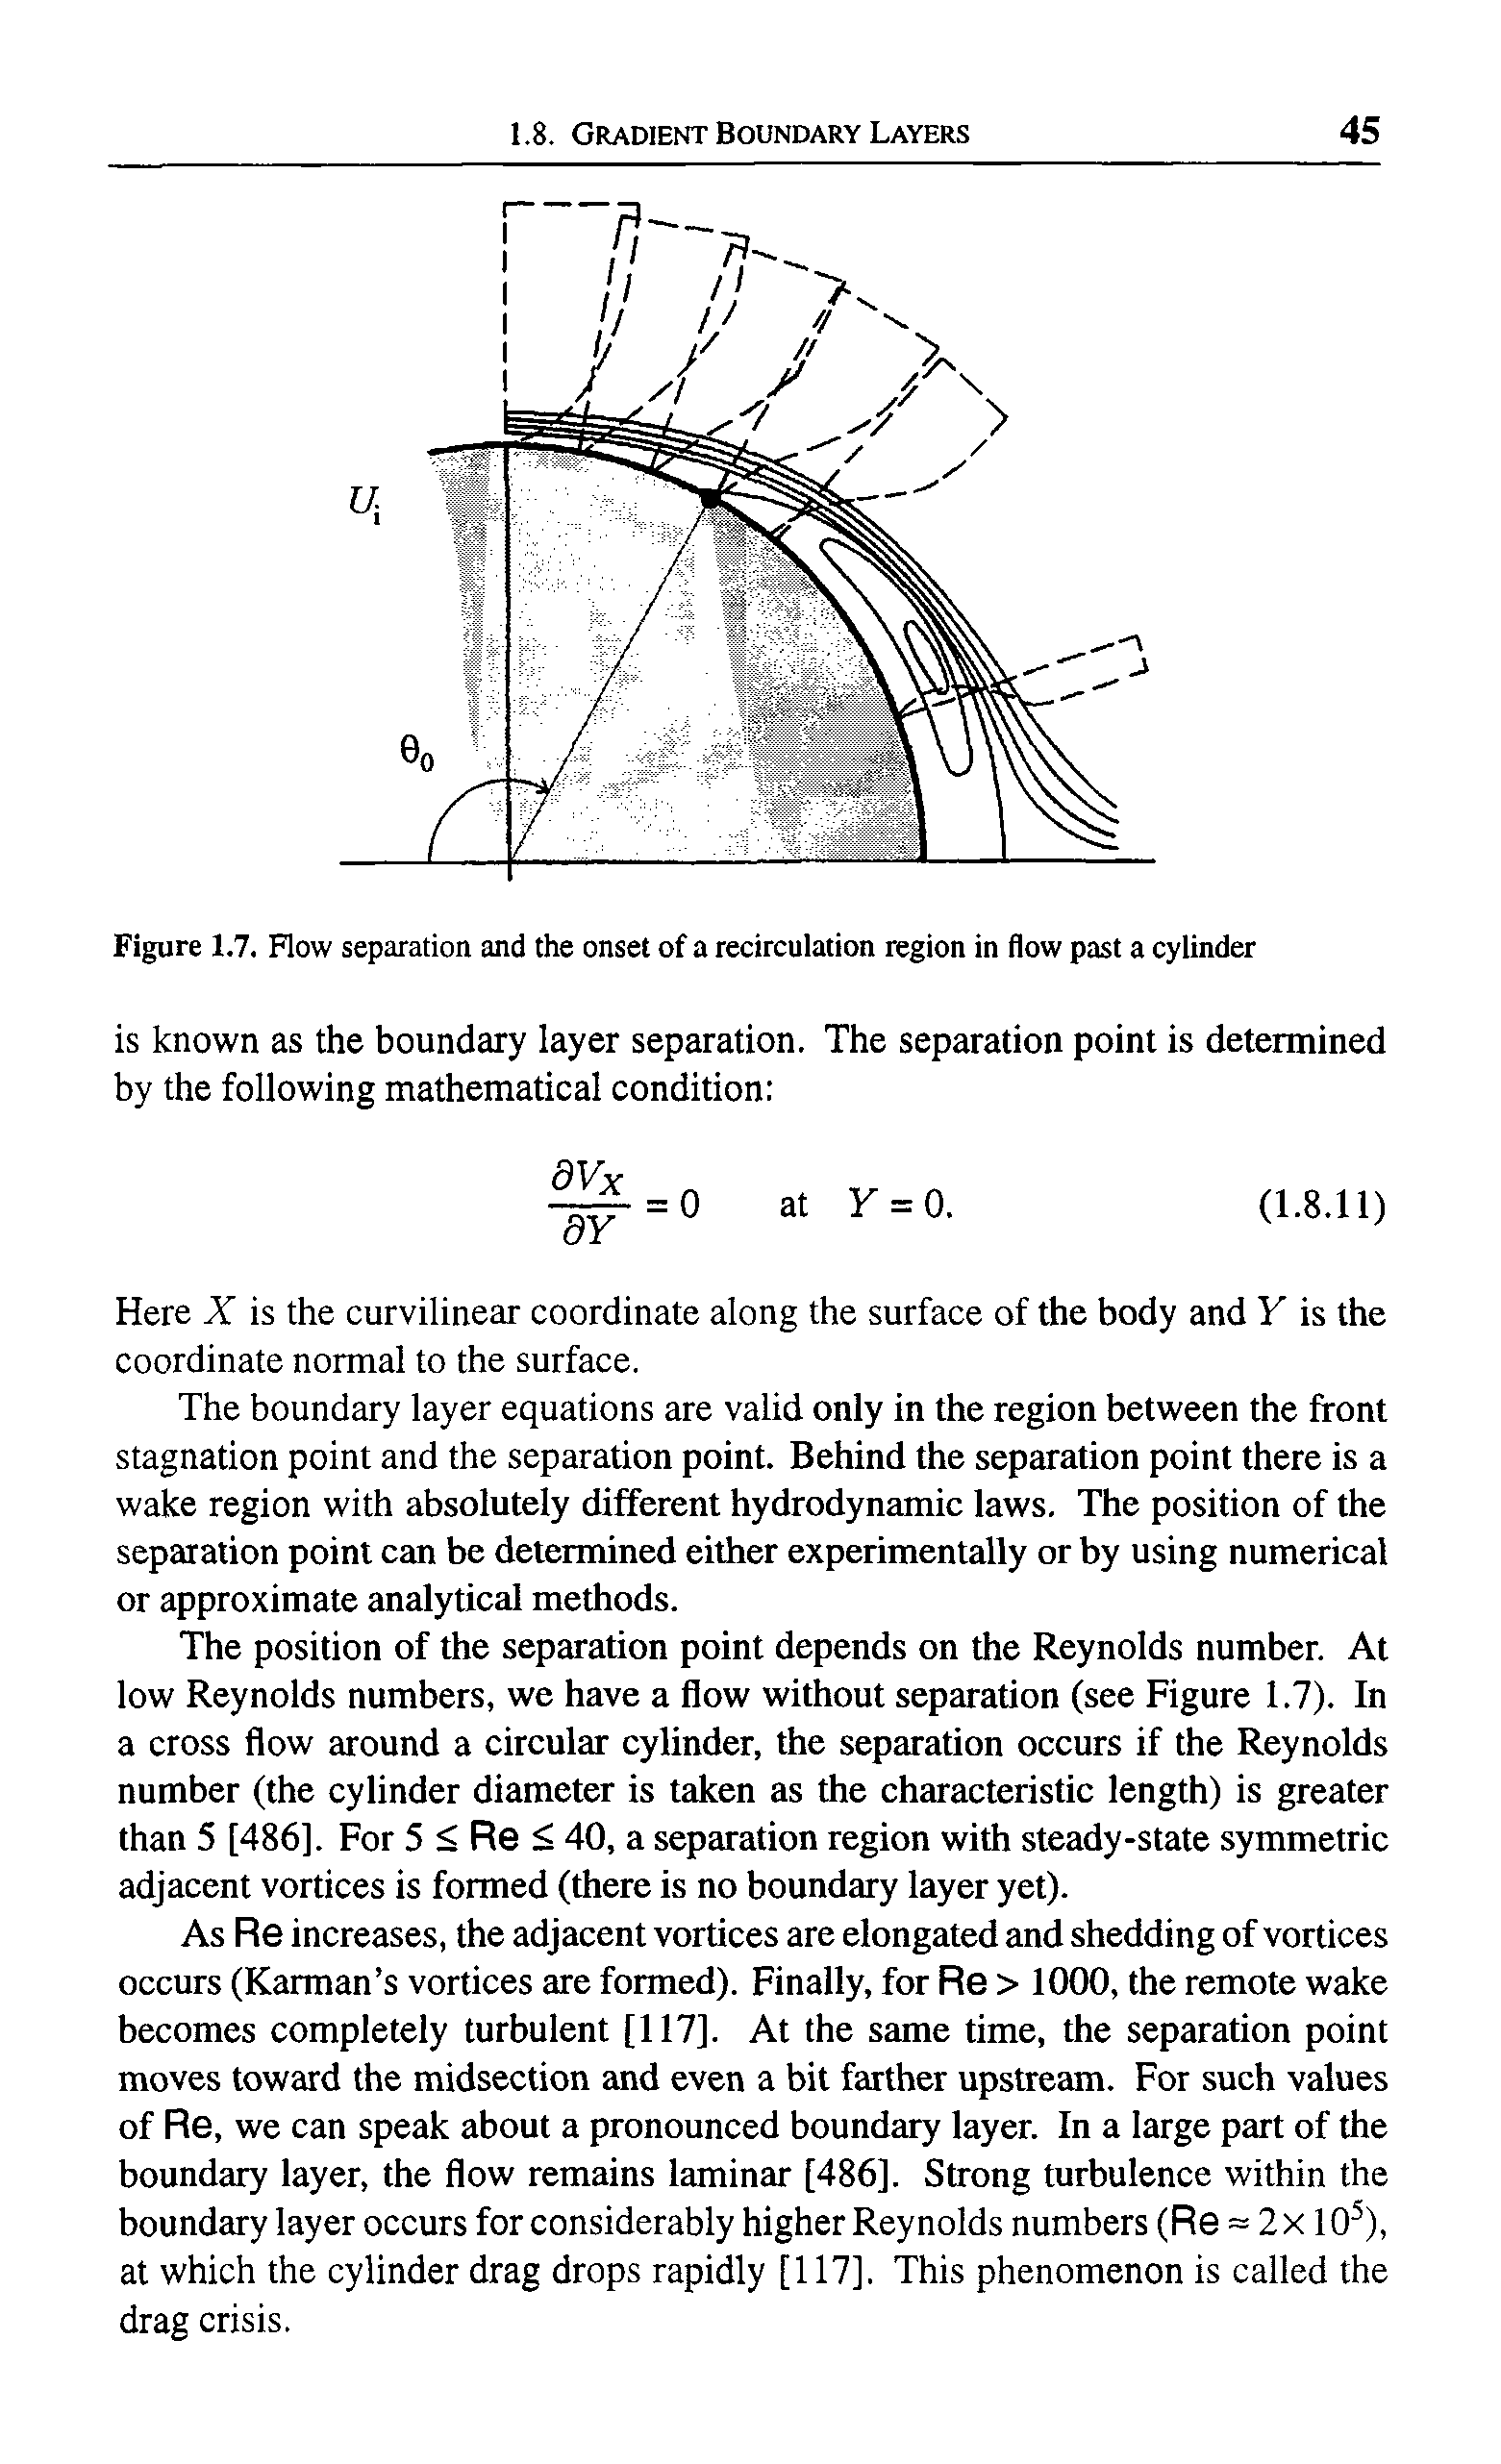 Figure 1.7. Flow separation and the onset of a recirculation region in flow past a cylinder...